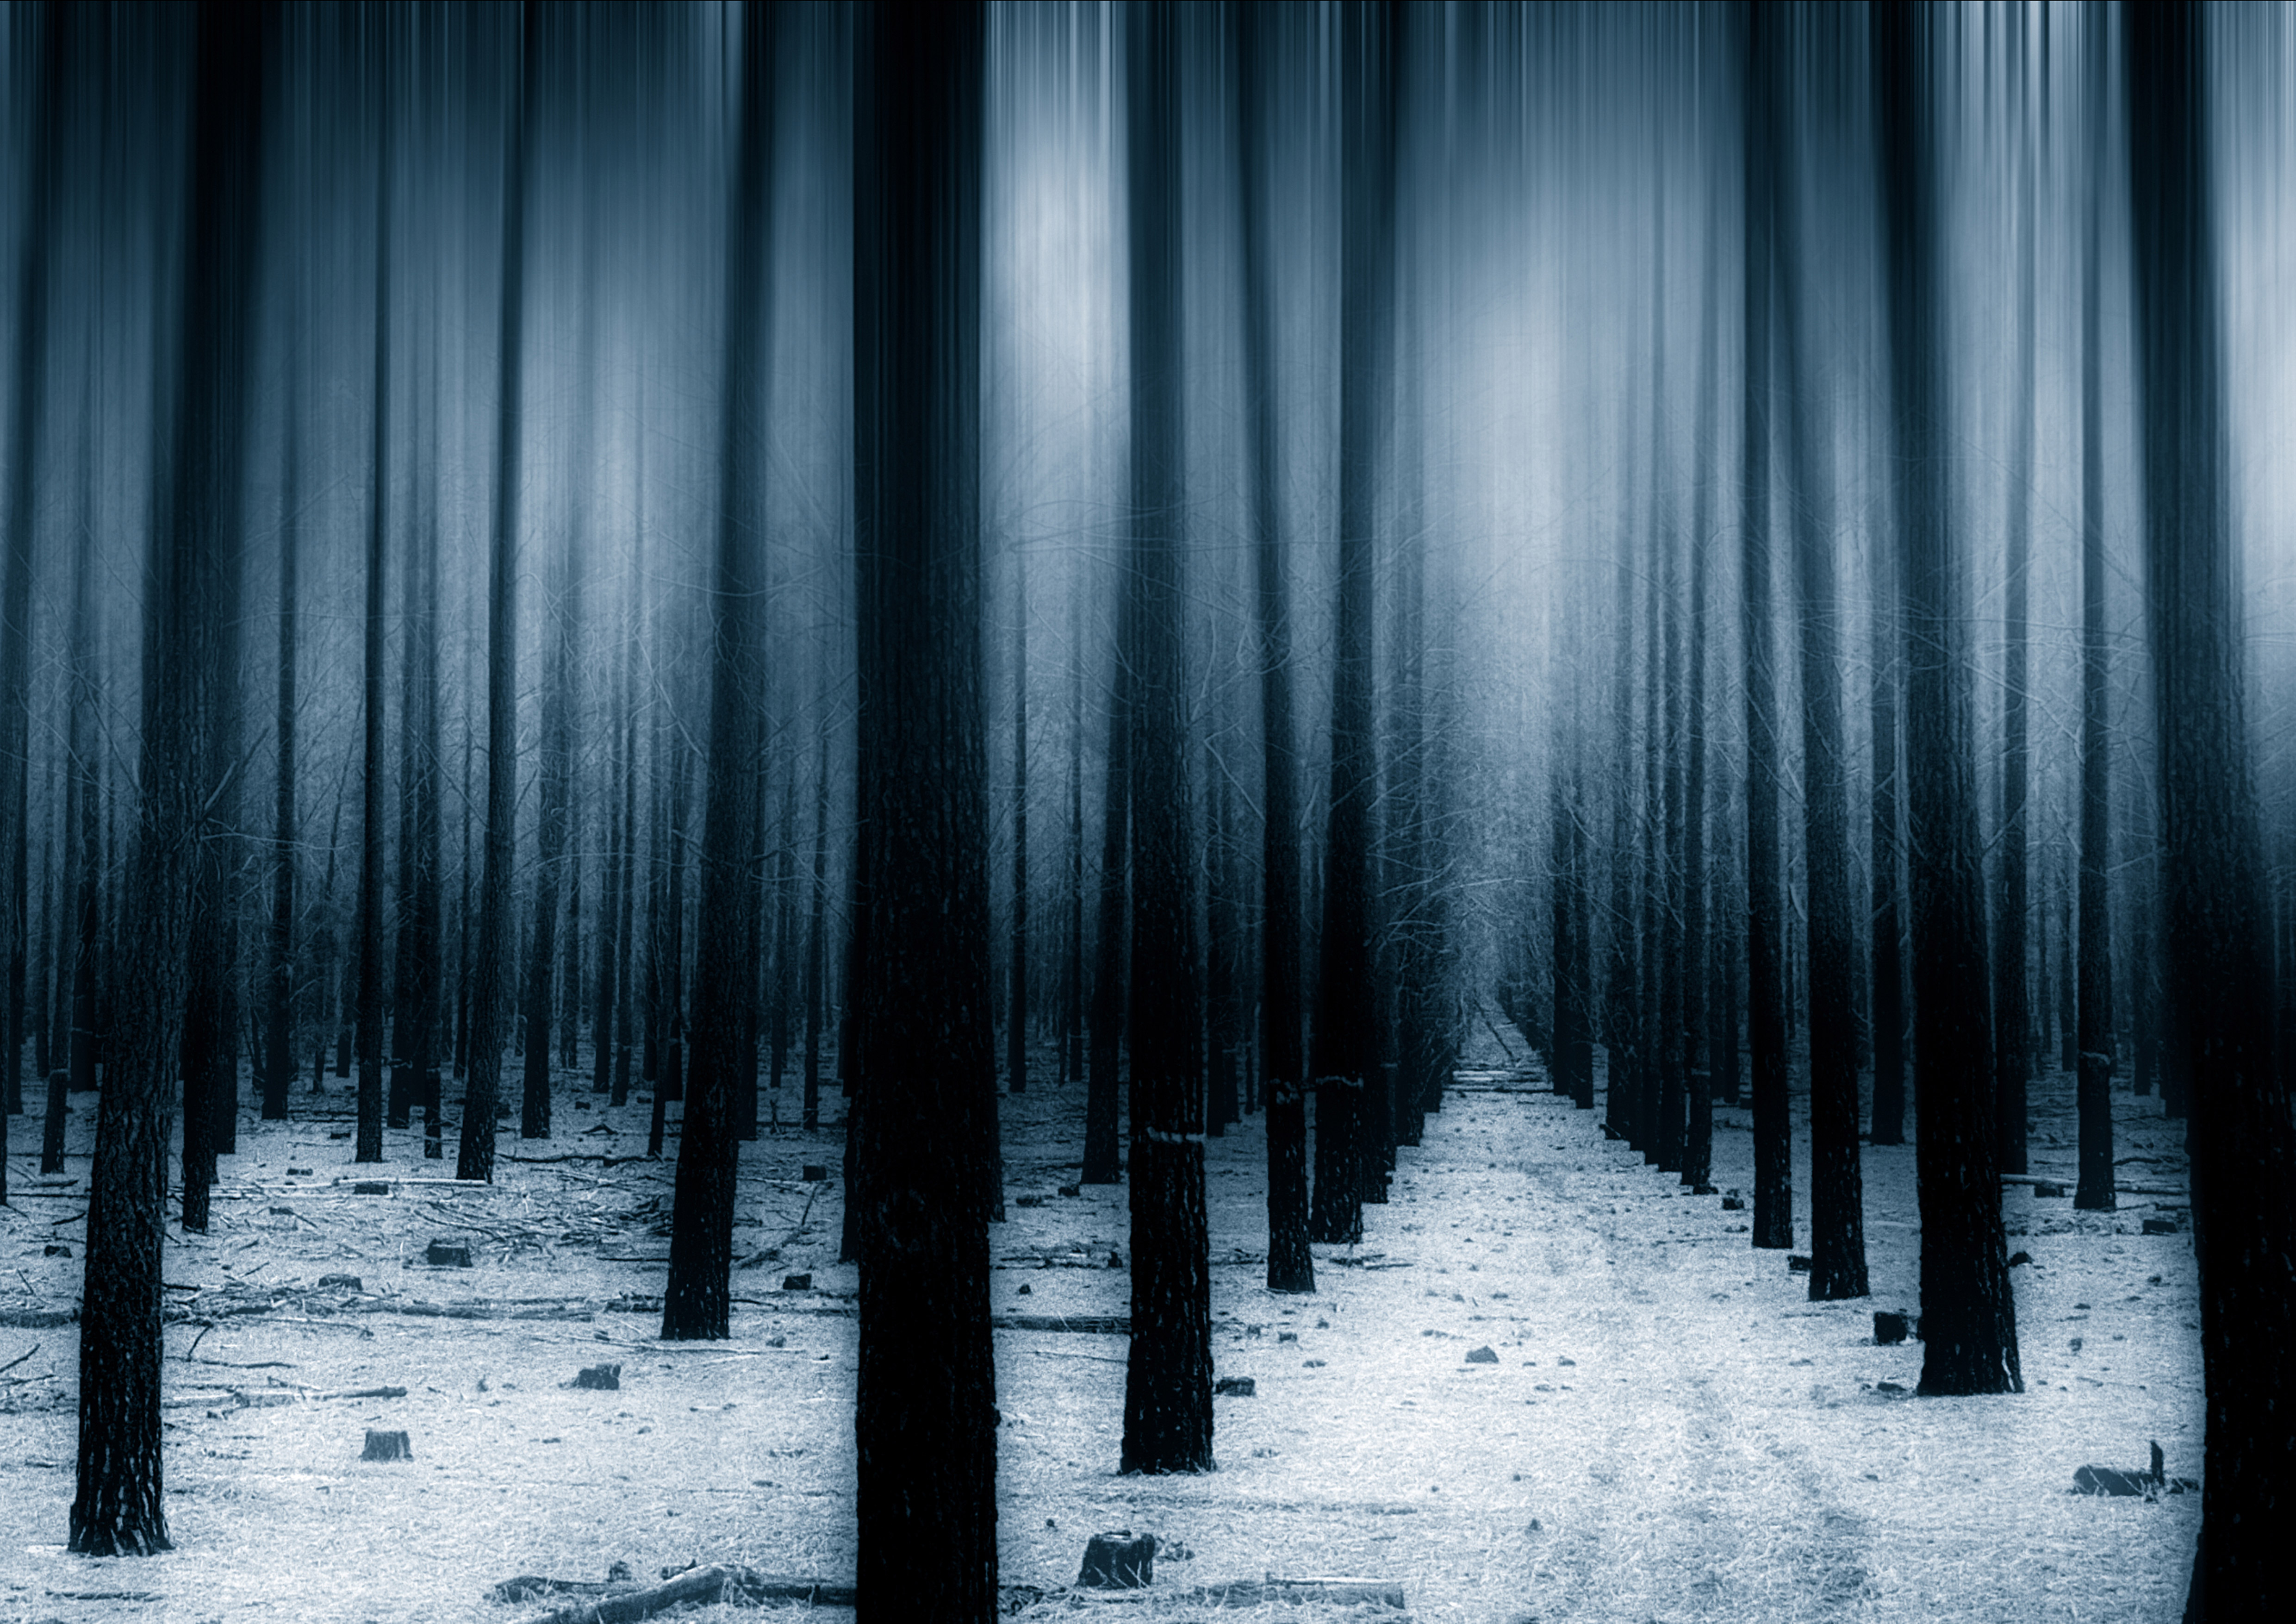 Dark Forest Woods Snow Winter 8k Hd Nature 4k Wallpapers Images Backgrounds Photos And Pictures To download dark wood wallpapers, right click on any picture you want and then select save image as… to start downloading the hd image in your desktop or laptop. hdqwalls